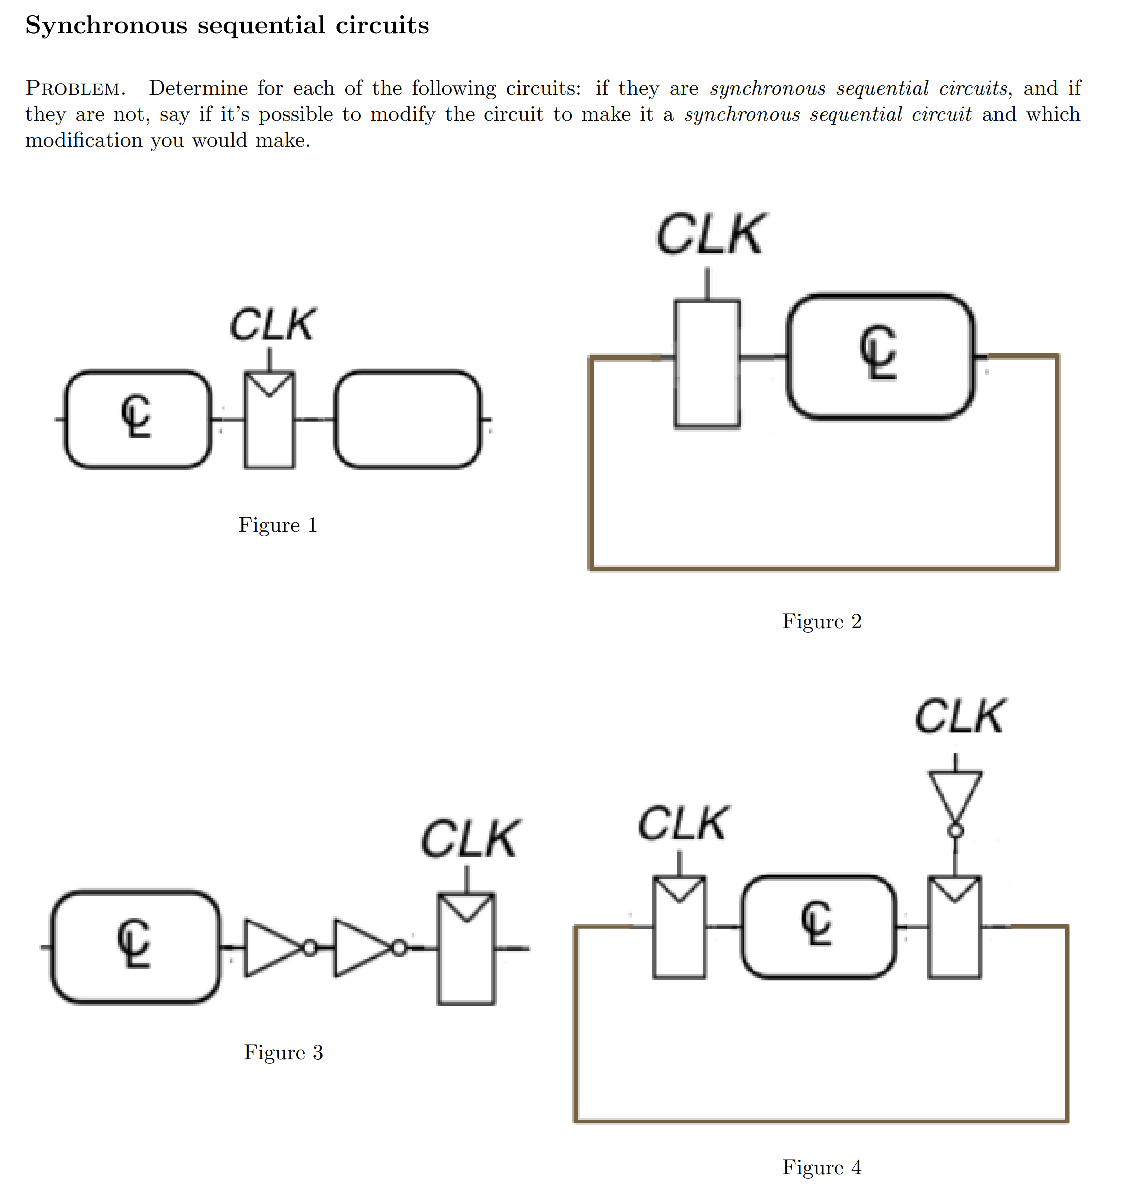 Synchronous sequential circuits
PROBLEM. Determine for each of the following circuits: if they are synchronous sequential circuits, and if
they are not, say if it's possible to modify the circuit to make it a synchronous sequential circuit and which
modification you would make.
C
CLK
10
Figure 1
CLK
Figure 3
CLK
C
Figure 2
CLK
Oxirio!
CLK
Figure 4